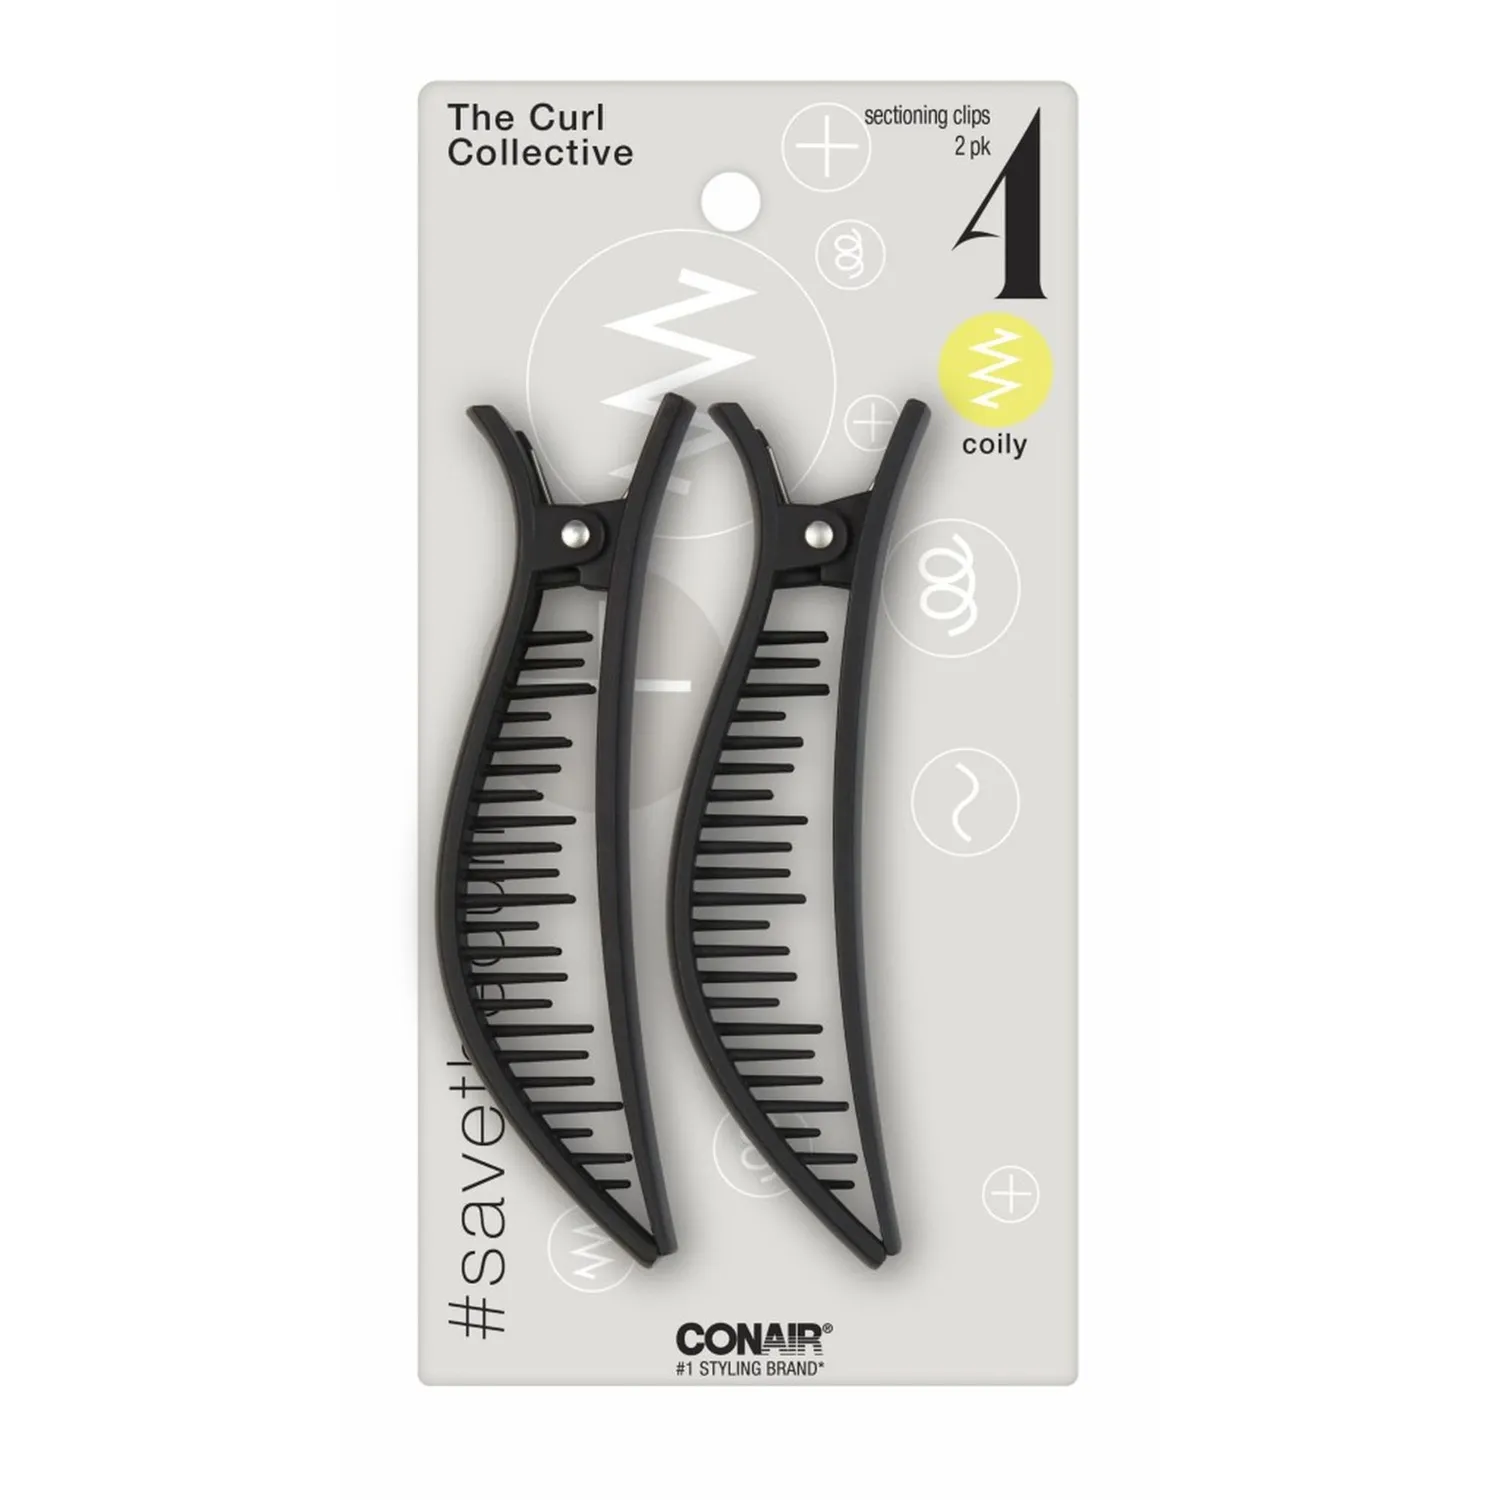 CONAIR 2PK COILY THE CURL COLLECTIVE SECTIONING CLIPS UPC:074108560230 PACK:24/3